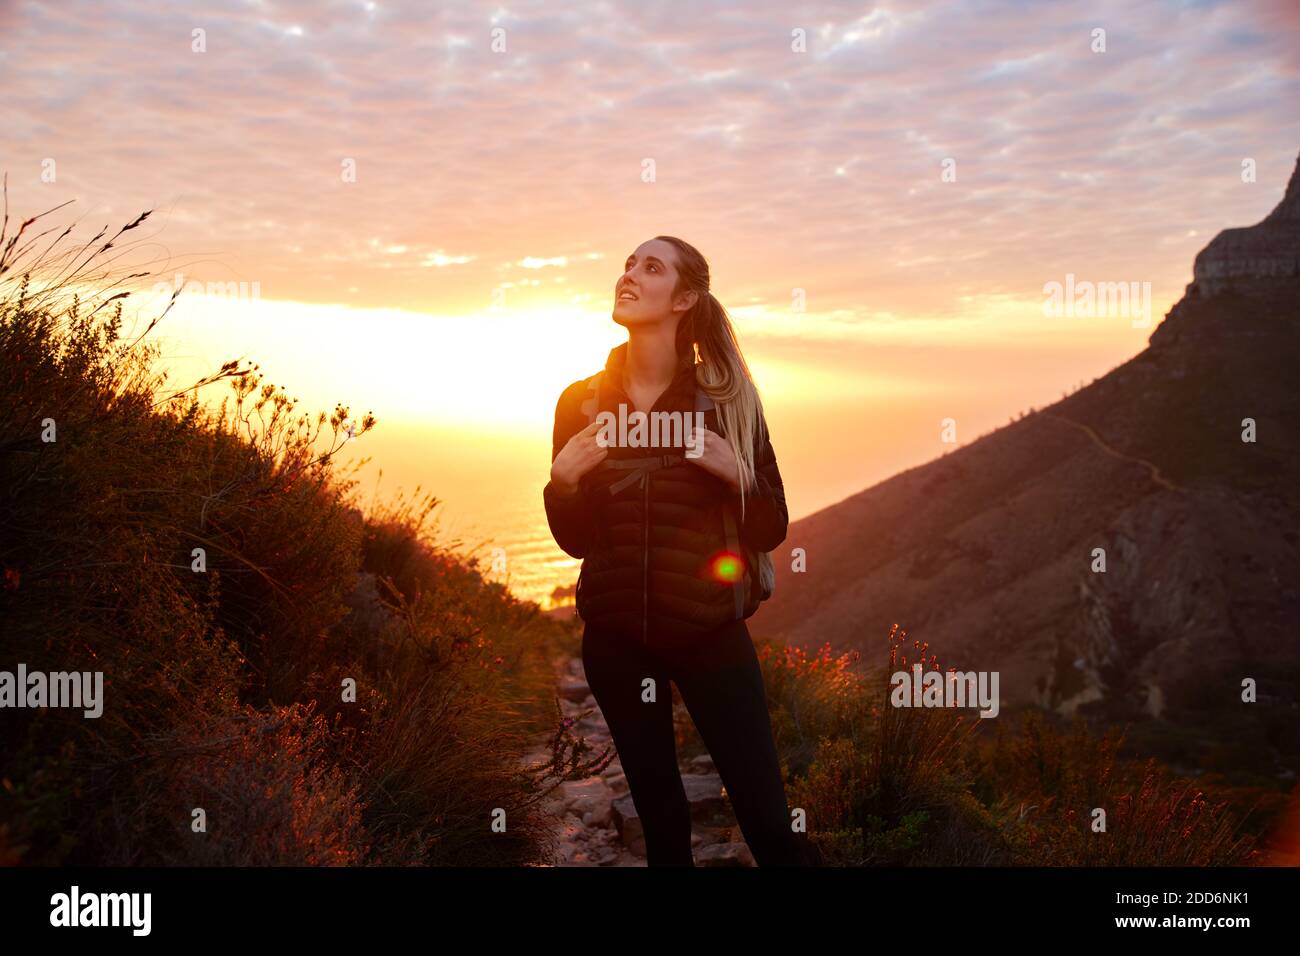 Front view of young woman on vacation wearing backpack setting off on hike climbing coastal path at sunset Stock Photo